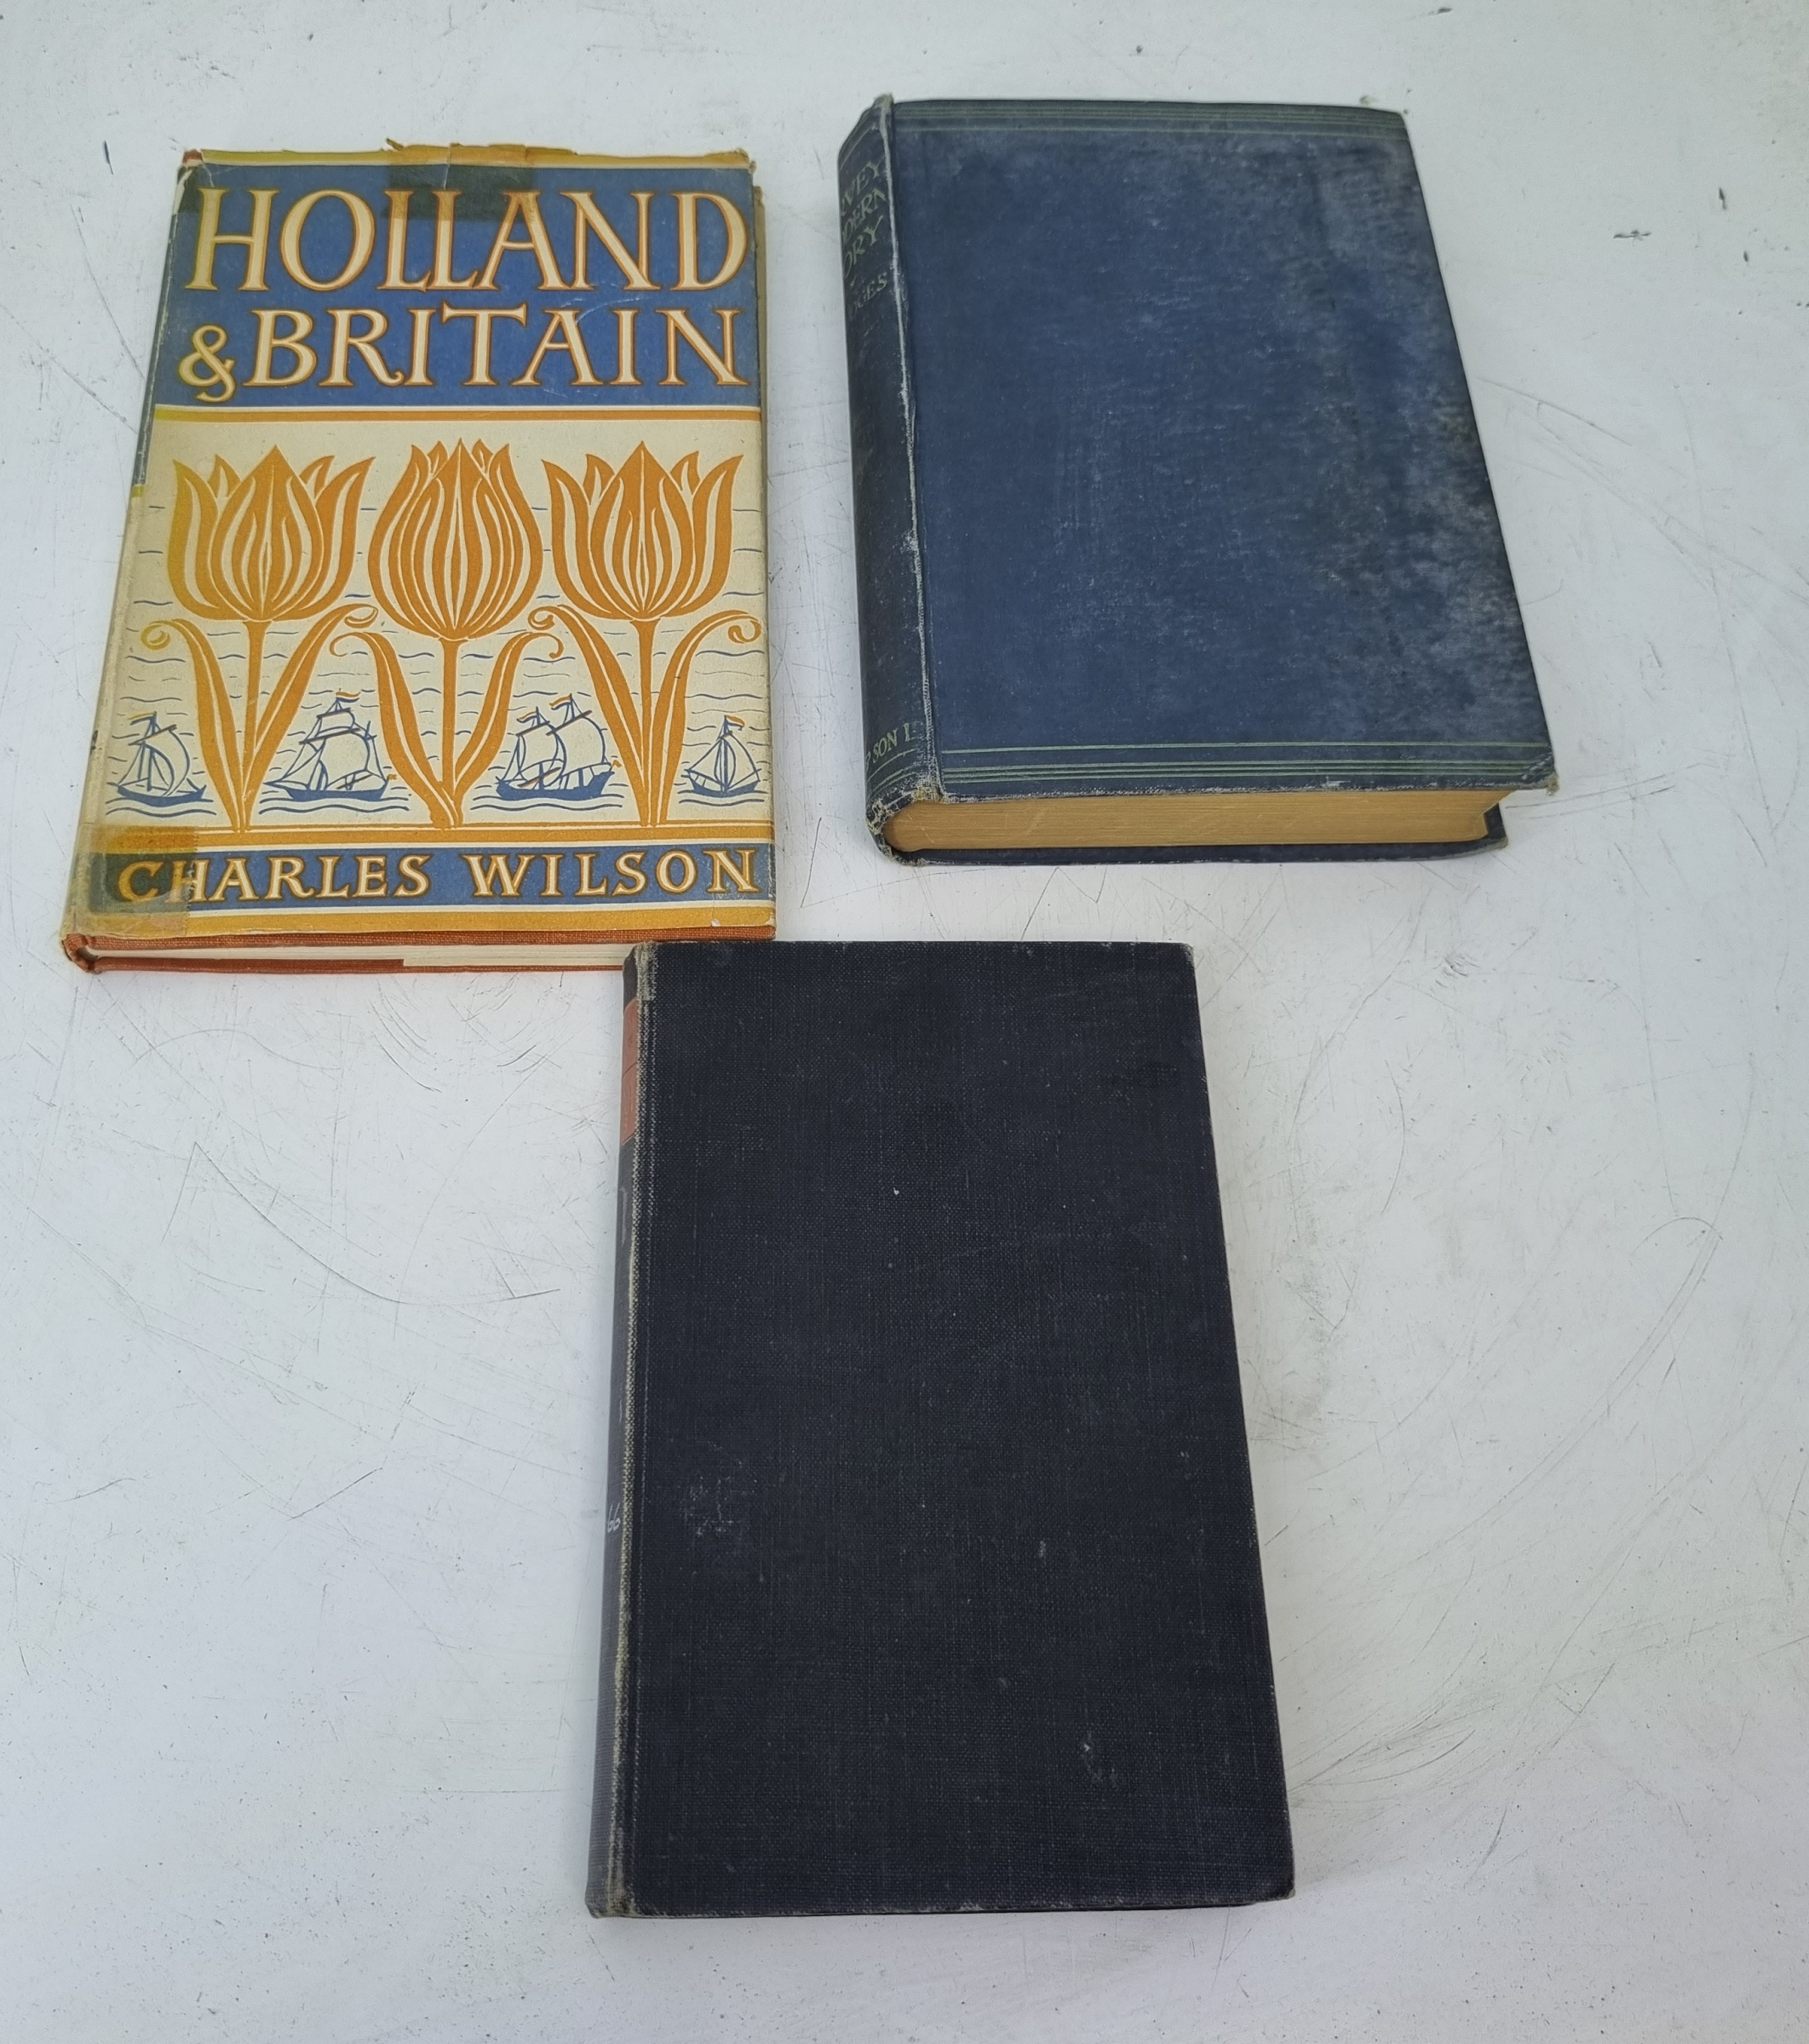 Holland & Britain by Charles Wilson, Journey Without Maps A Travel Book by Graham Greene - Published - Image 2 of 18